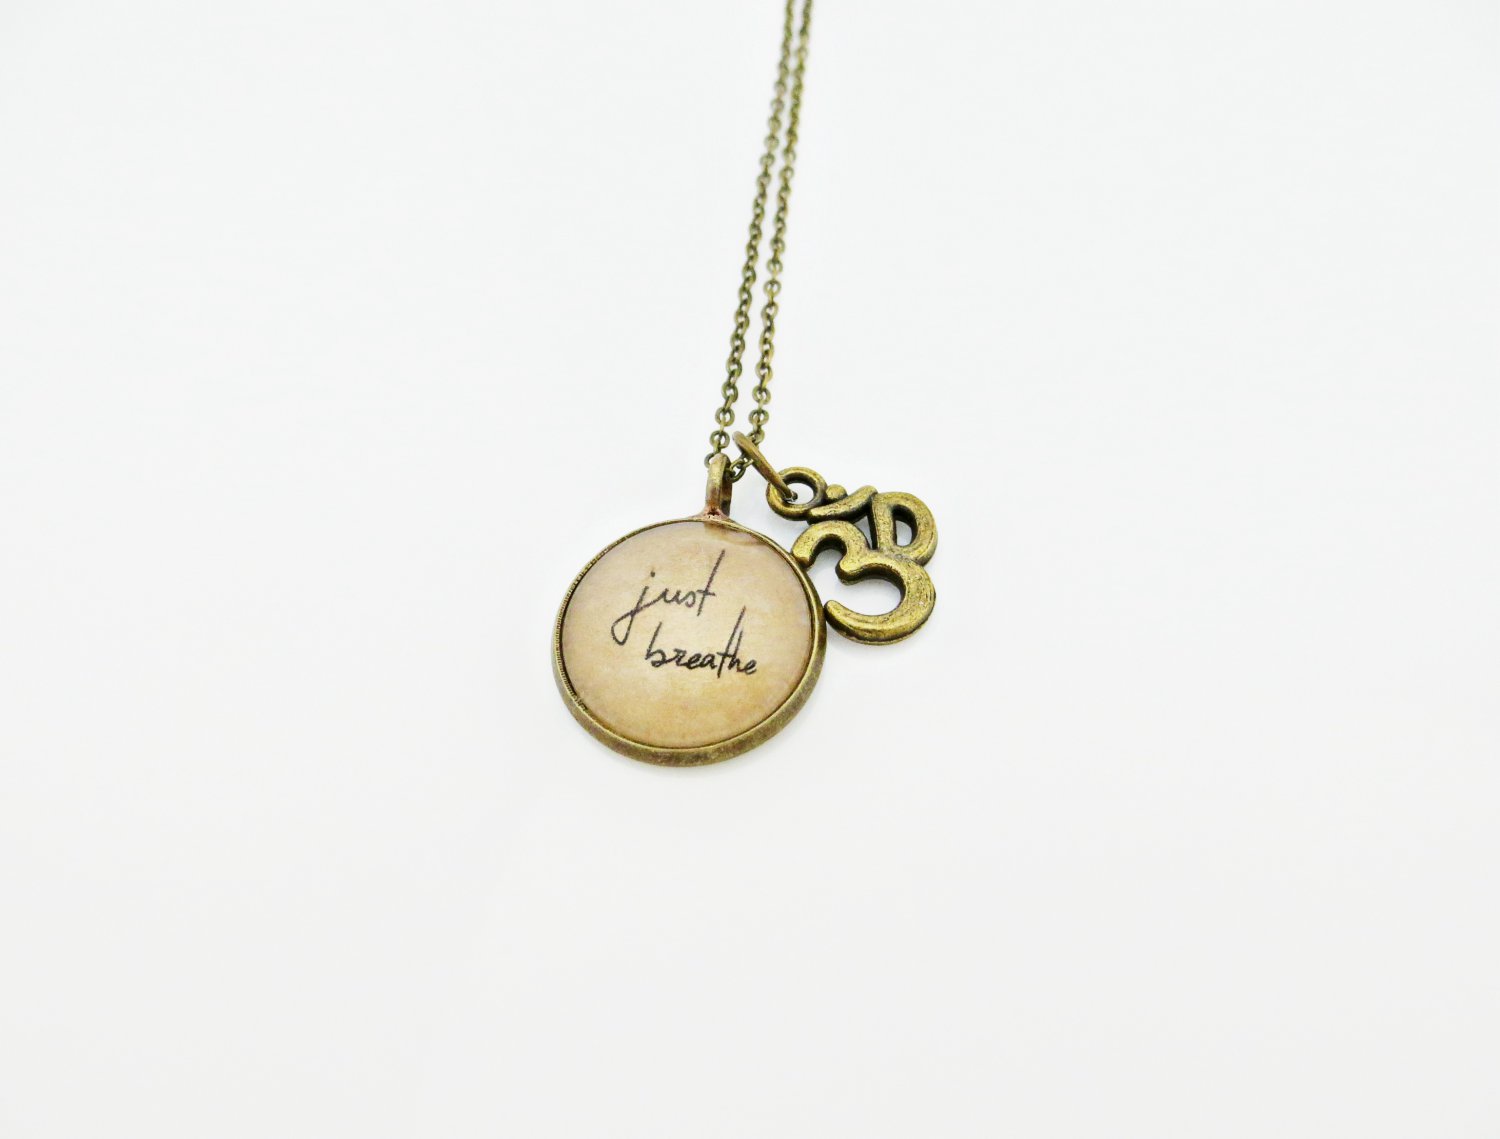 Just Breathe Inspirational Quote Pendant Necklace With Ohm Charm (Brass